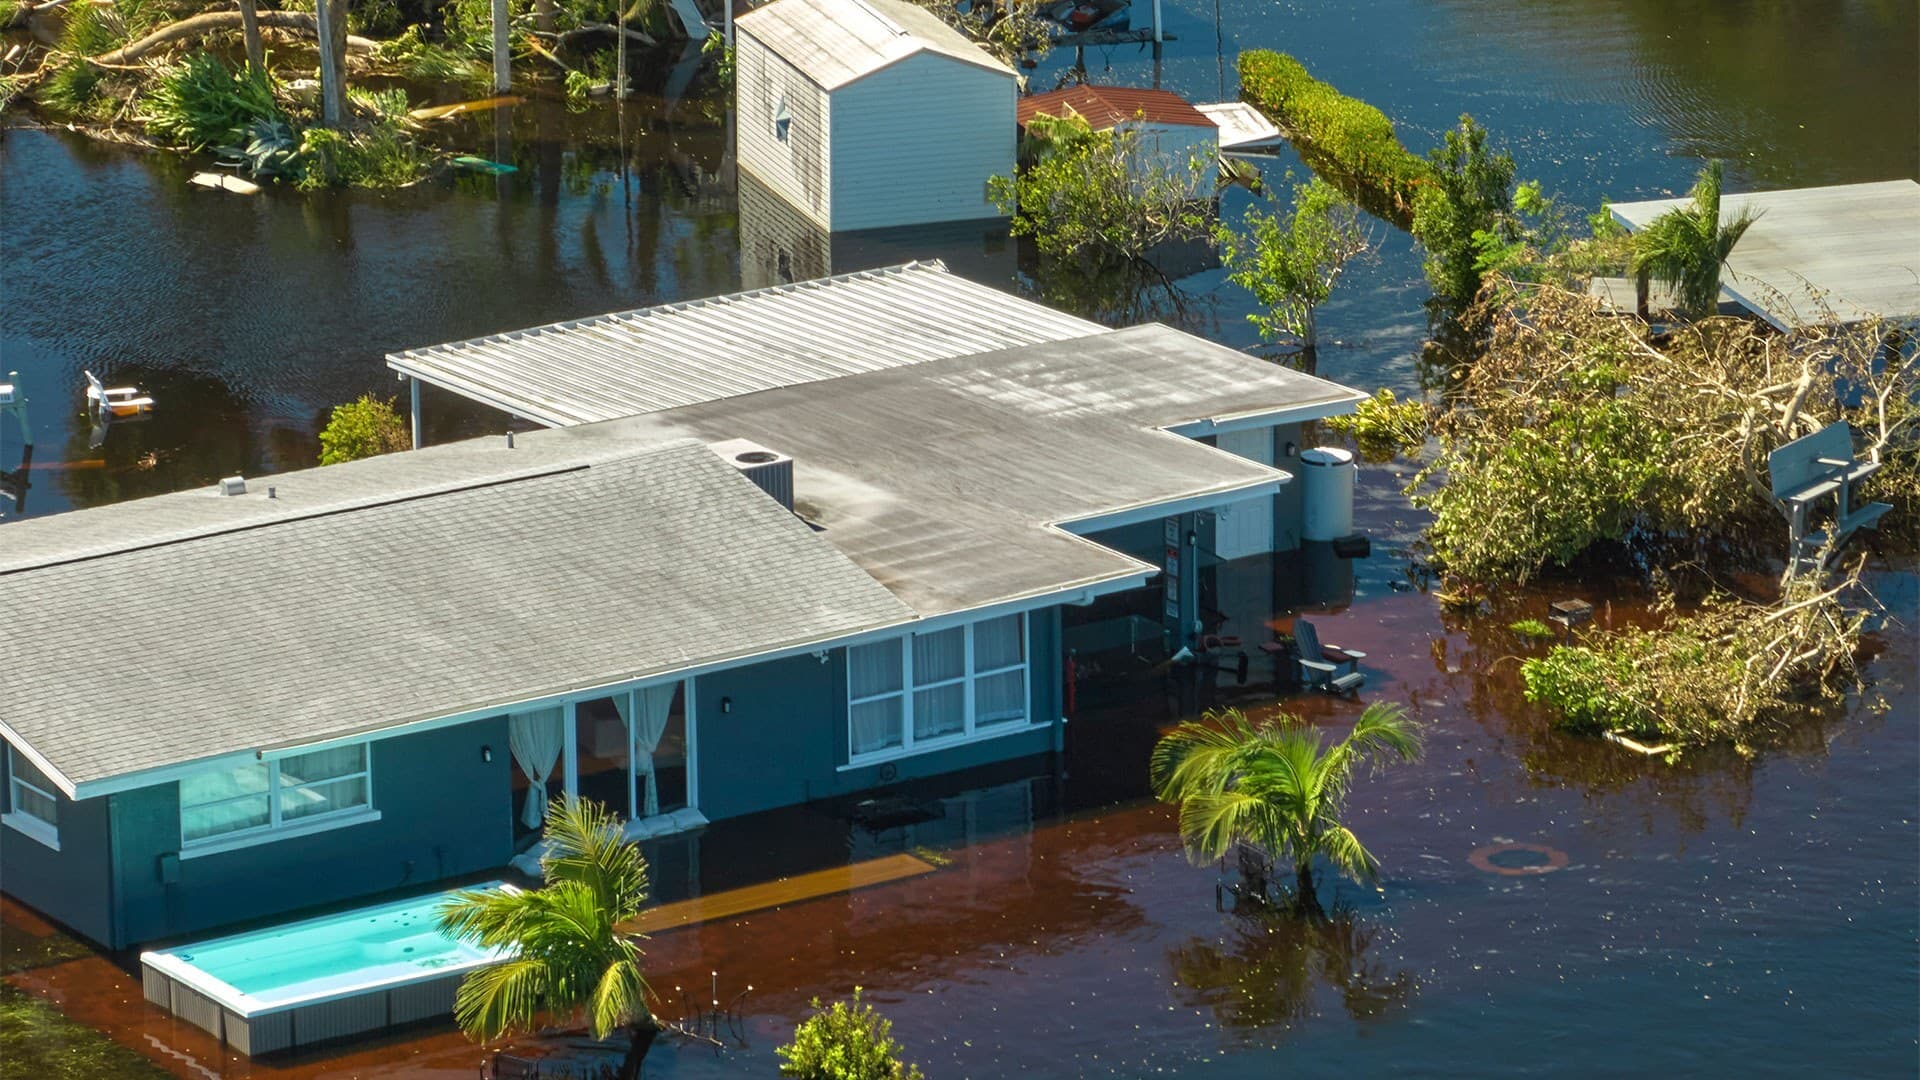 Floodwaters fill a Florida home in the wake of category 5 Hurricane Ian in fall 2022. A UMD professor and his students have developed new tools to quantify the risk of extreme weather in the United States.